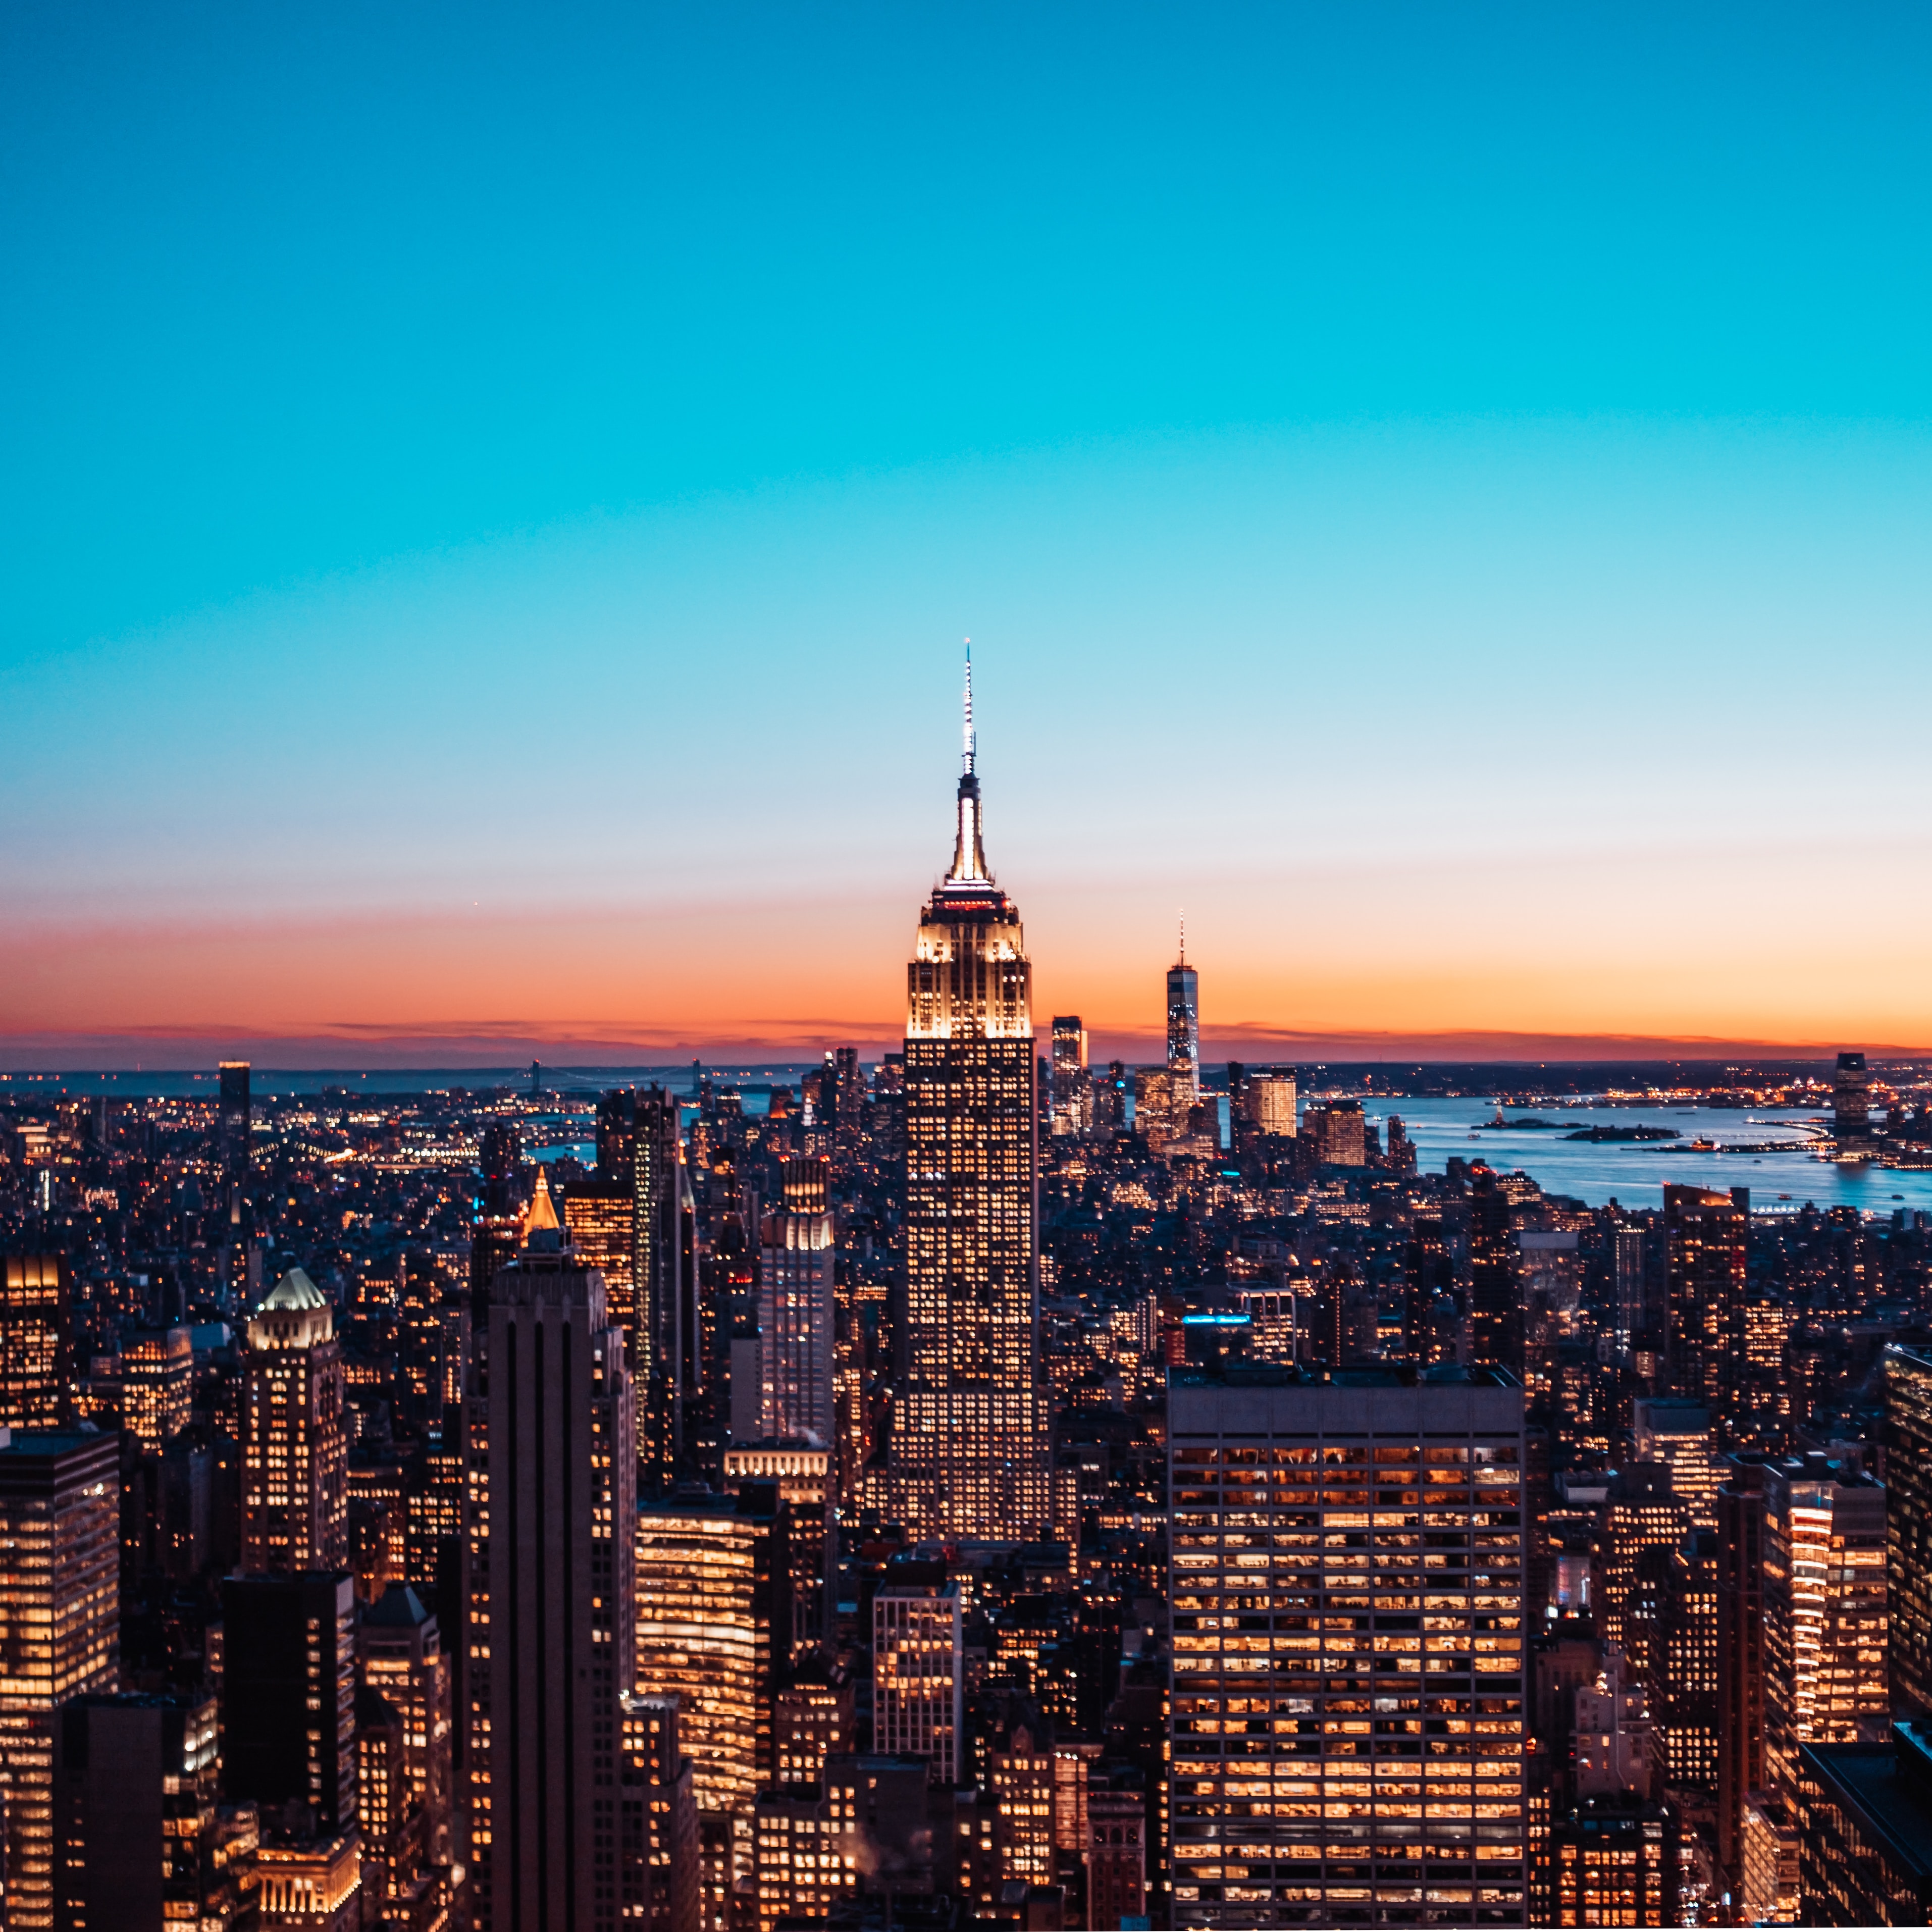 android new york, city, cities, architecture, twilight, building, view from above, dusk